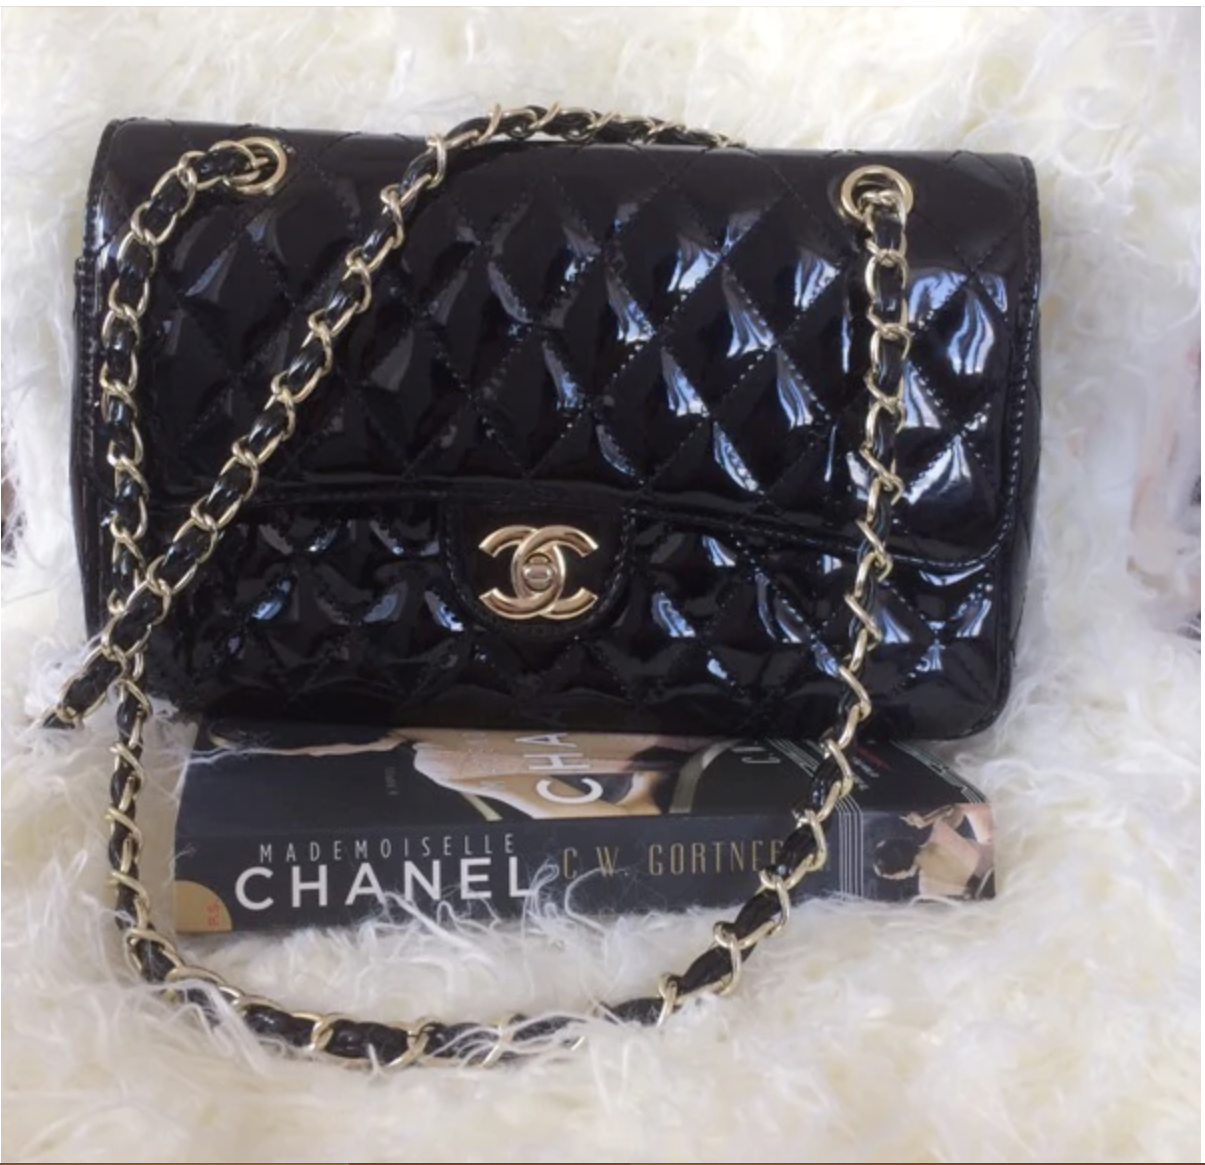 Why Have Chanel Bags Increased So Much in Price